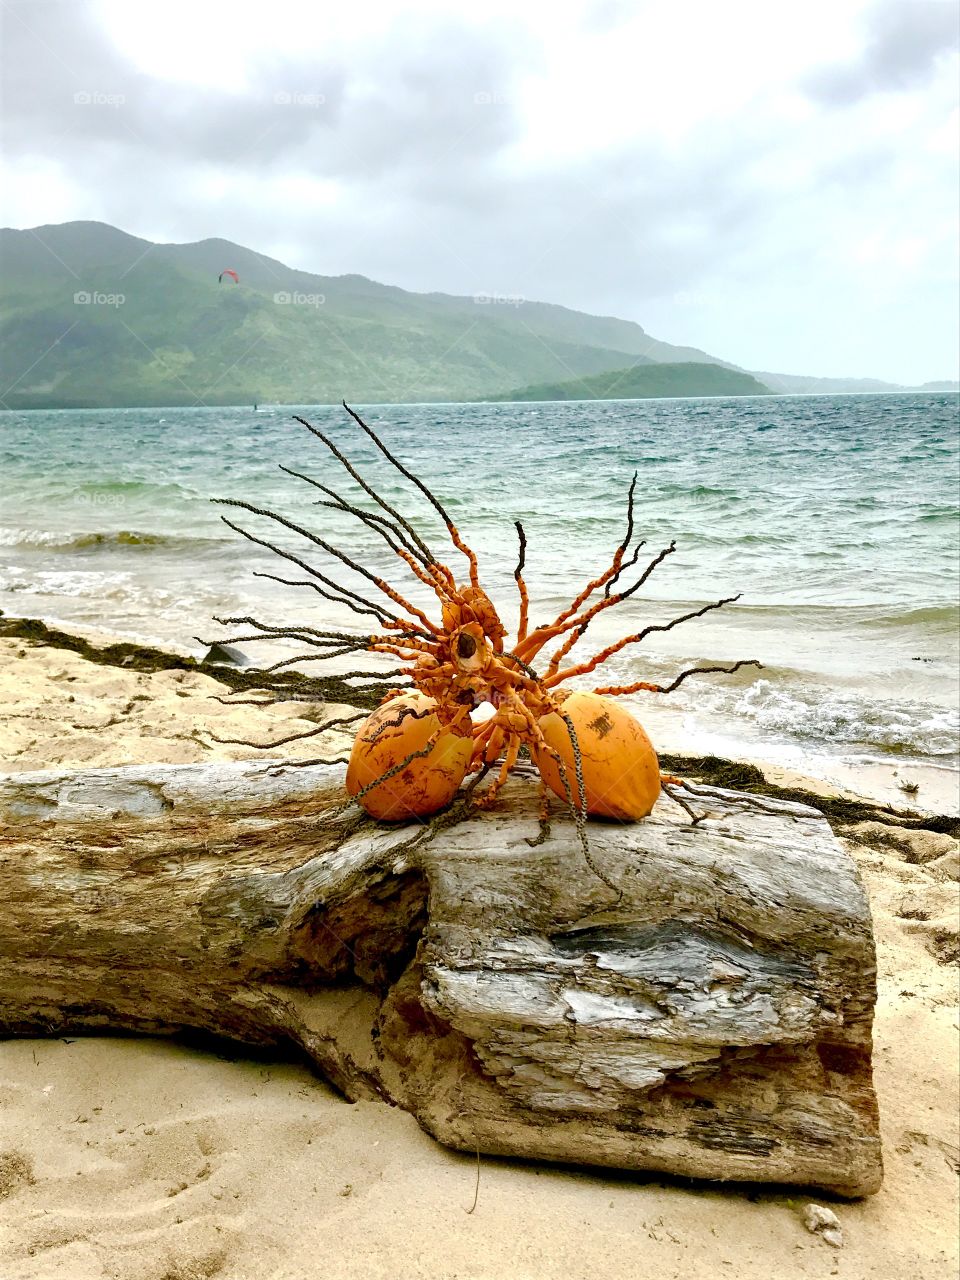 Coconuts fallen out of a palm tree at the Le Morne Beach on Mauritius Island Africa